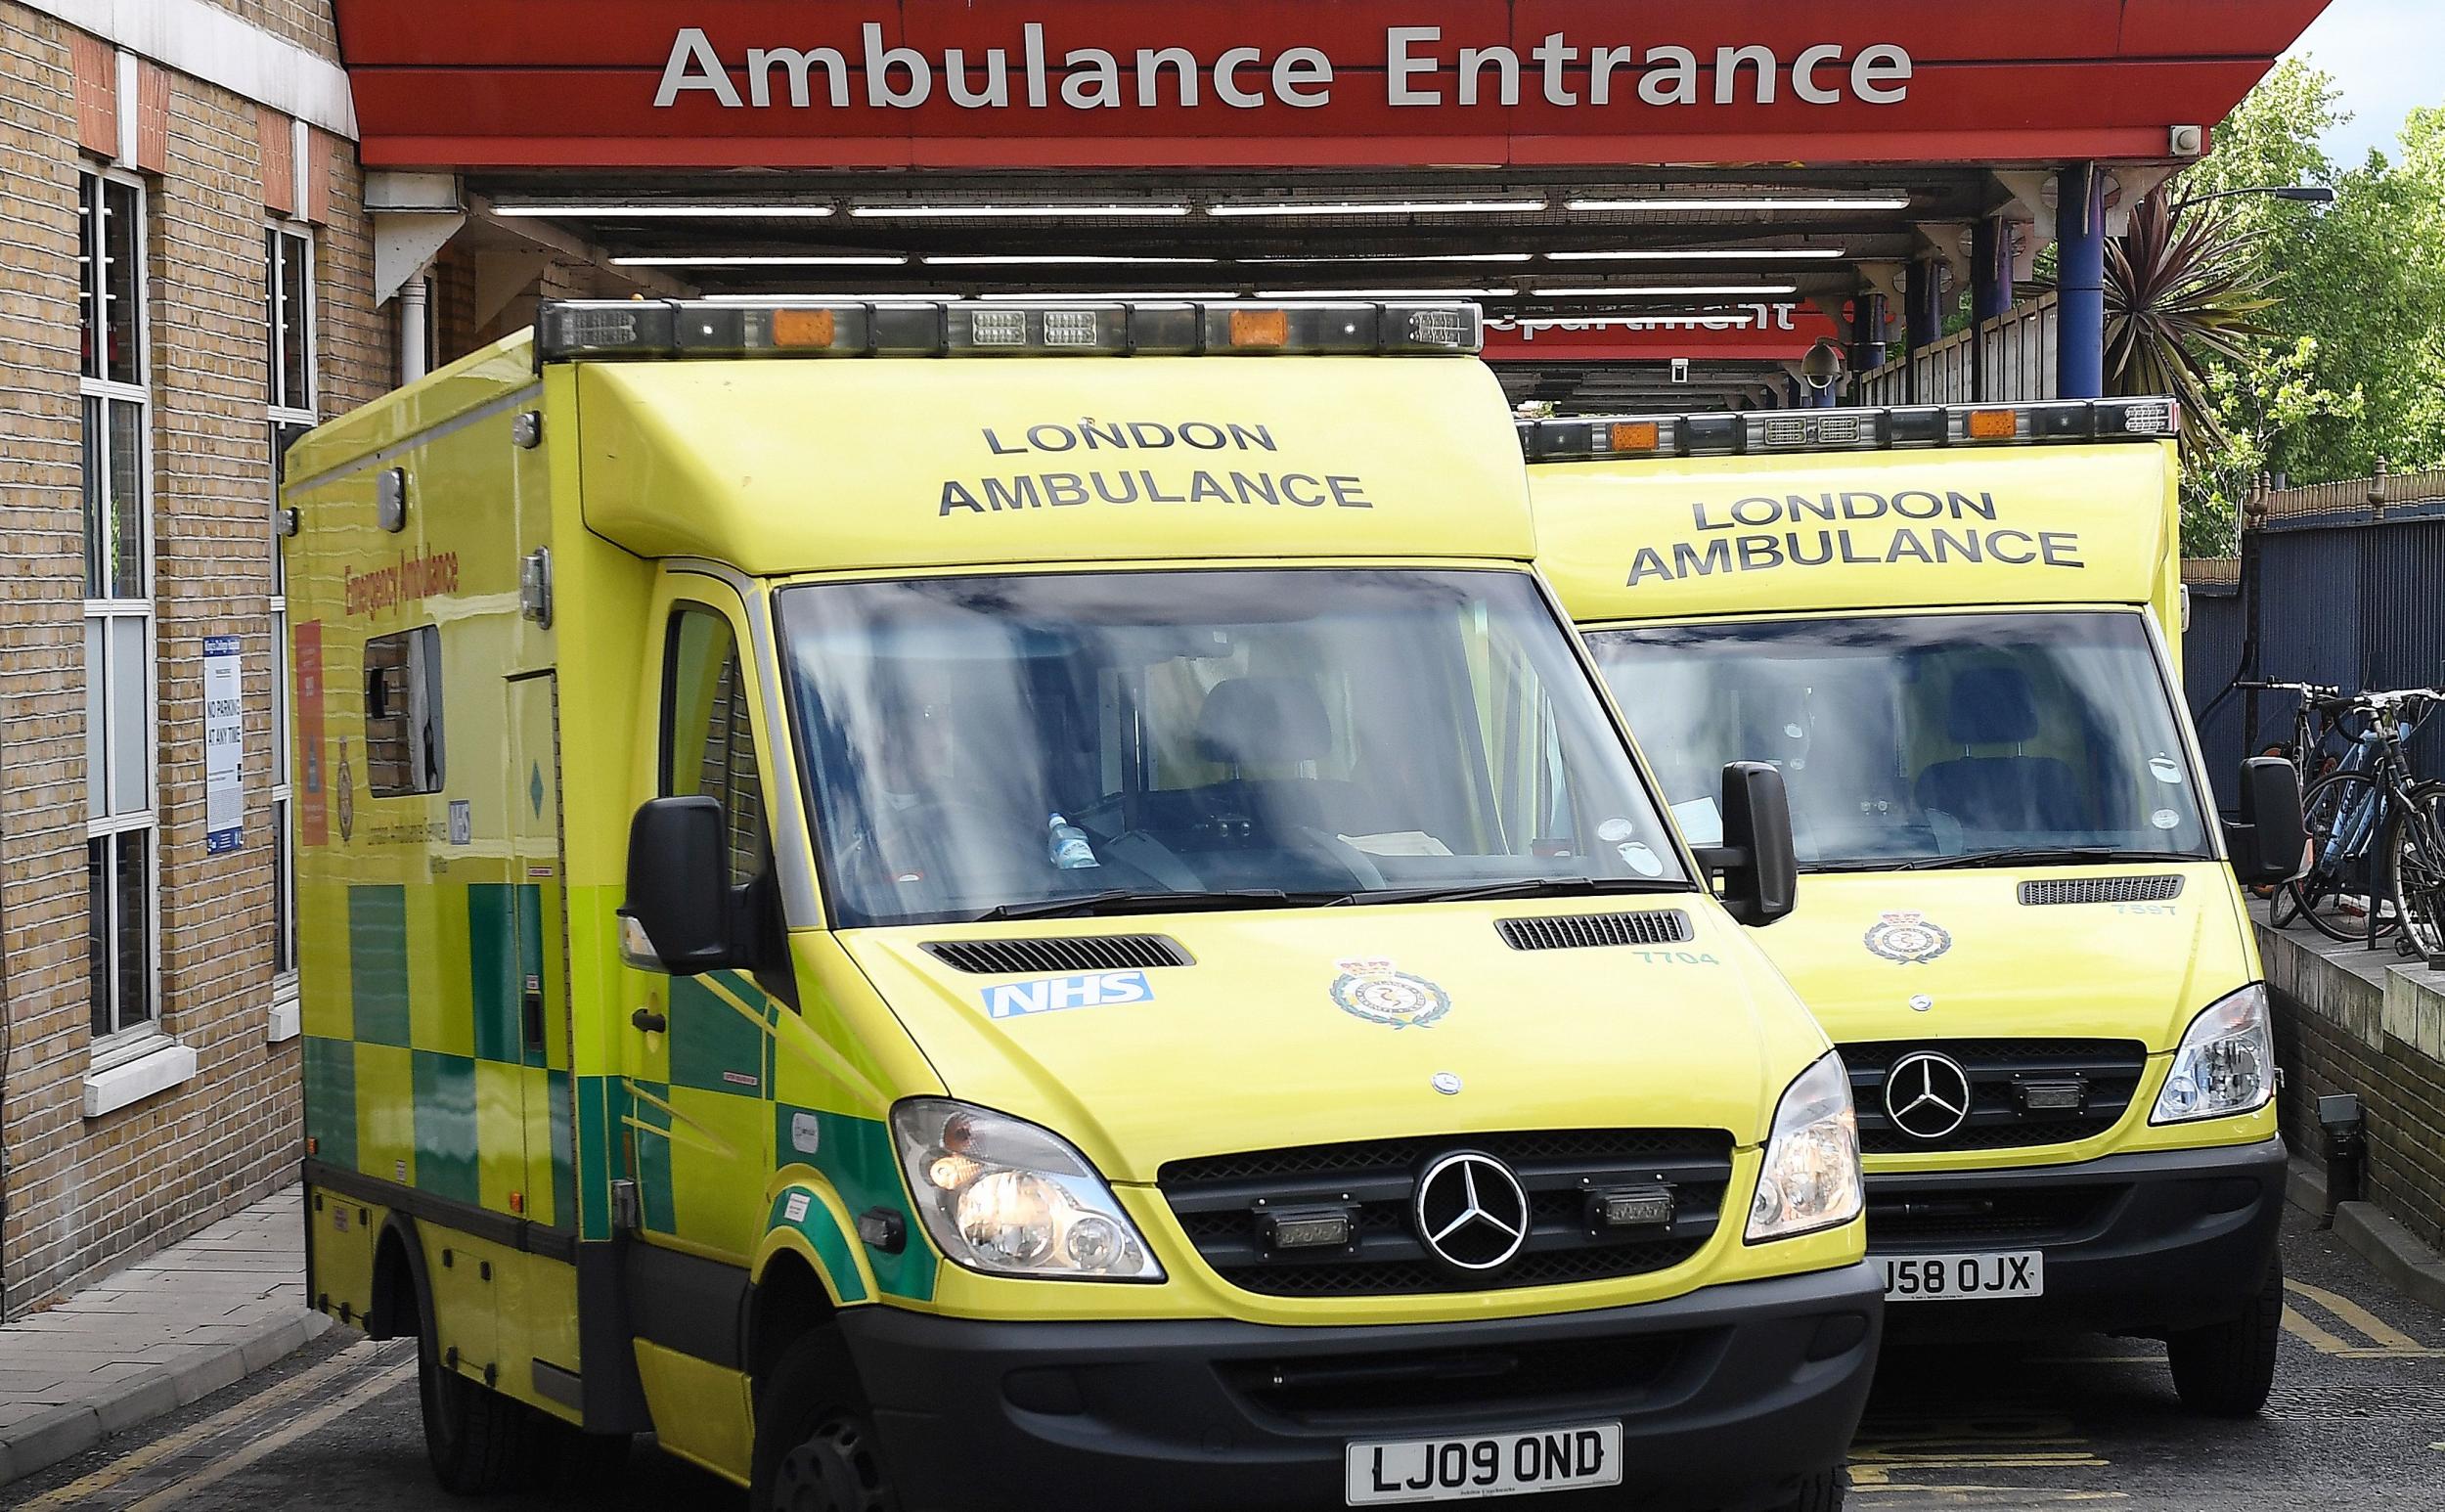 Ambulances had to queue outside A&E in record numbers last winter but summer brought no respite to emergency pressures, figures show